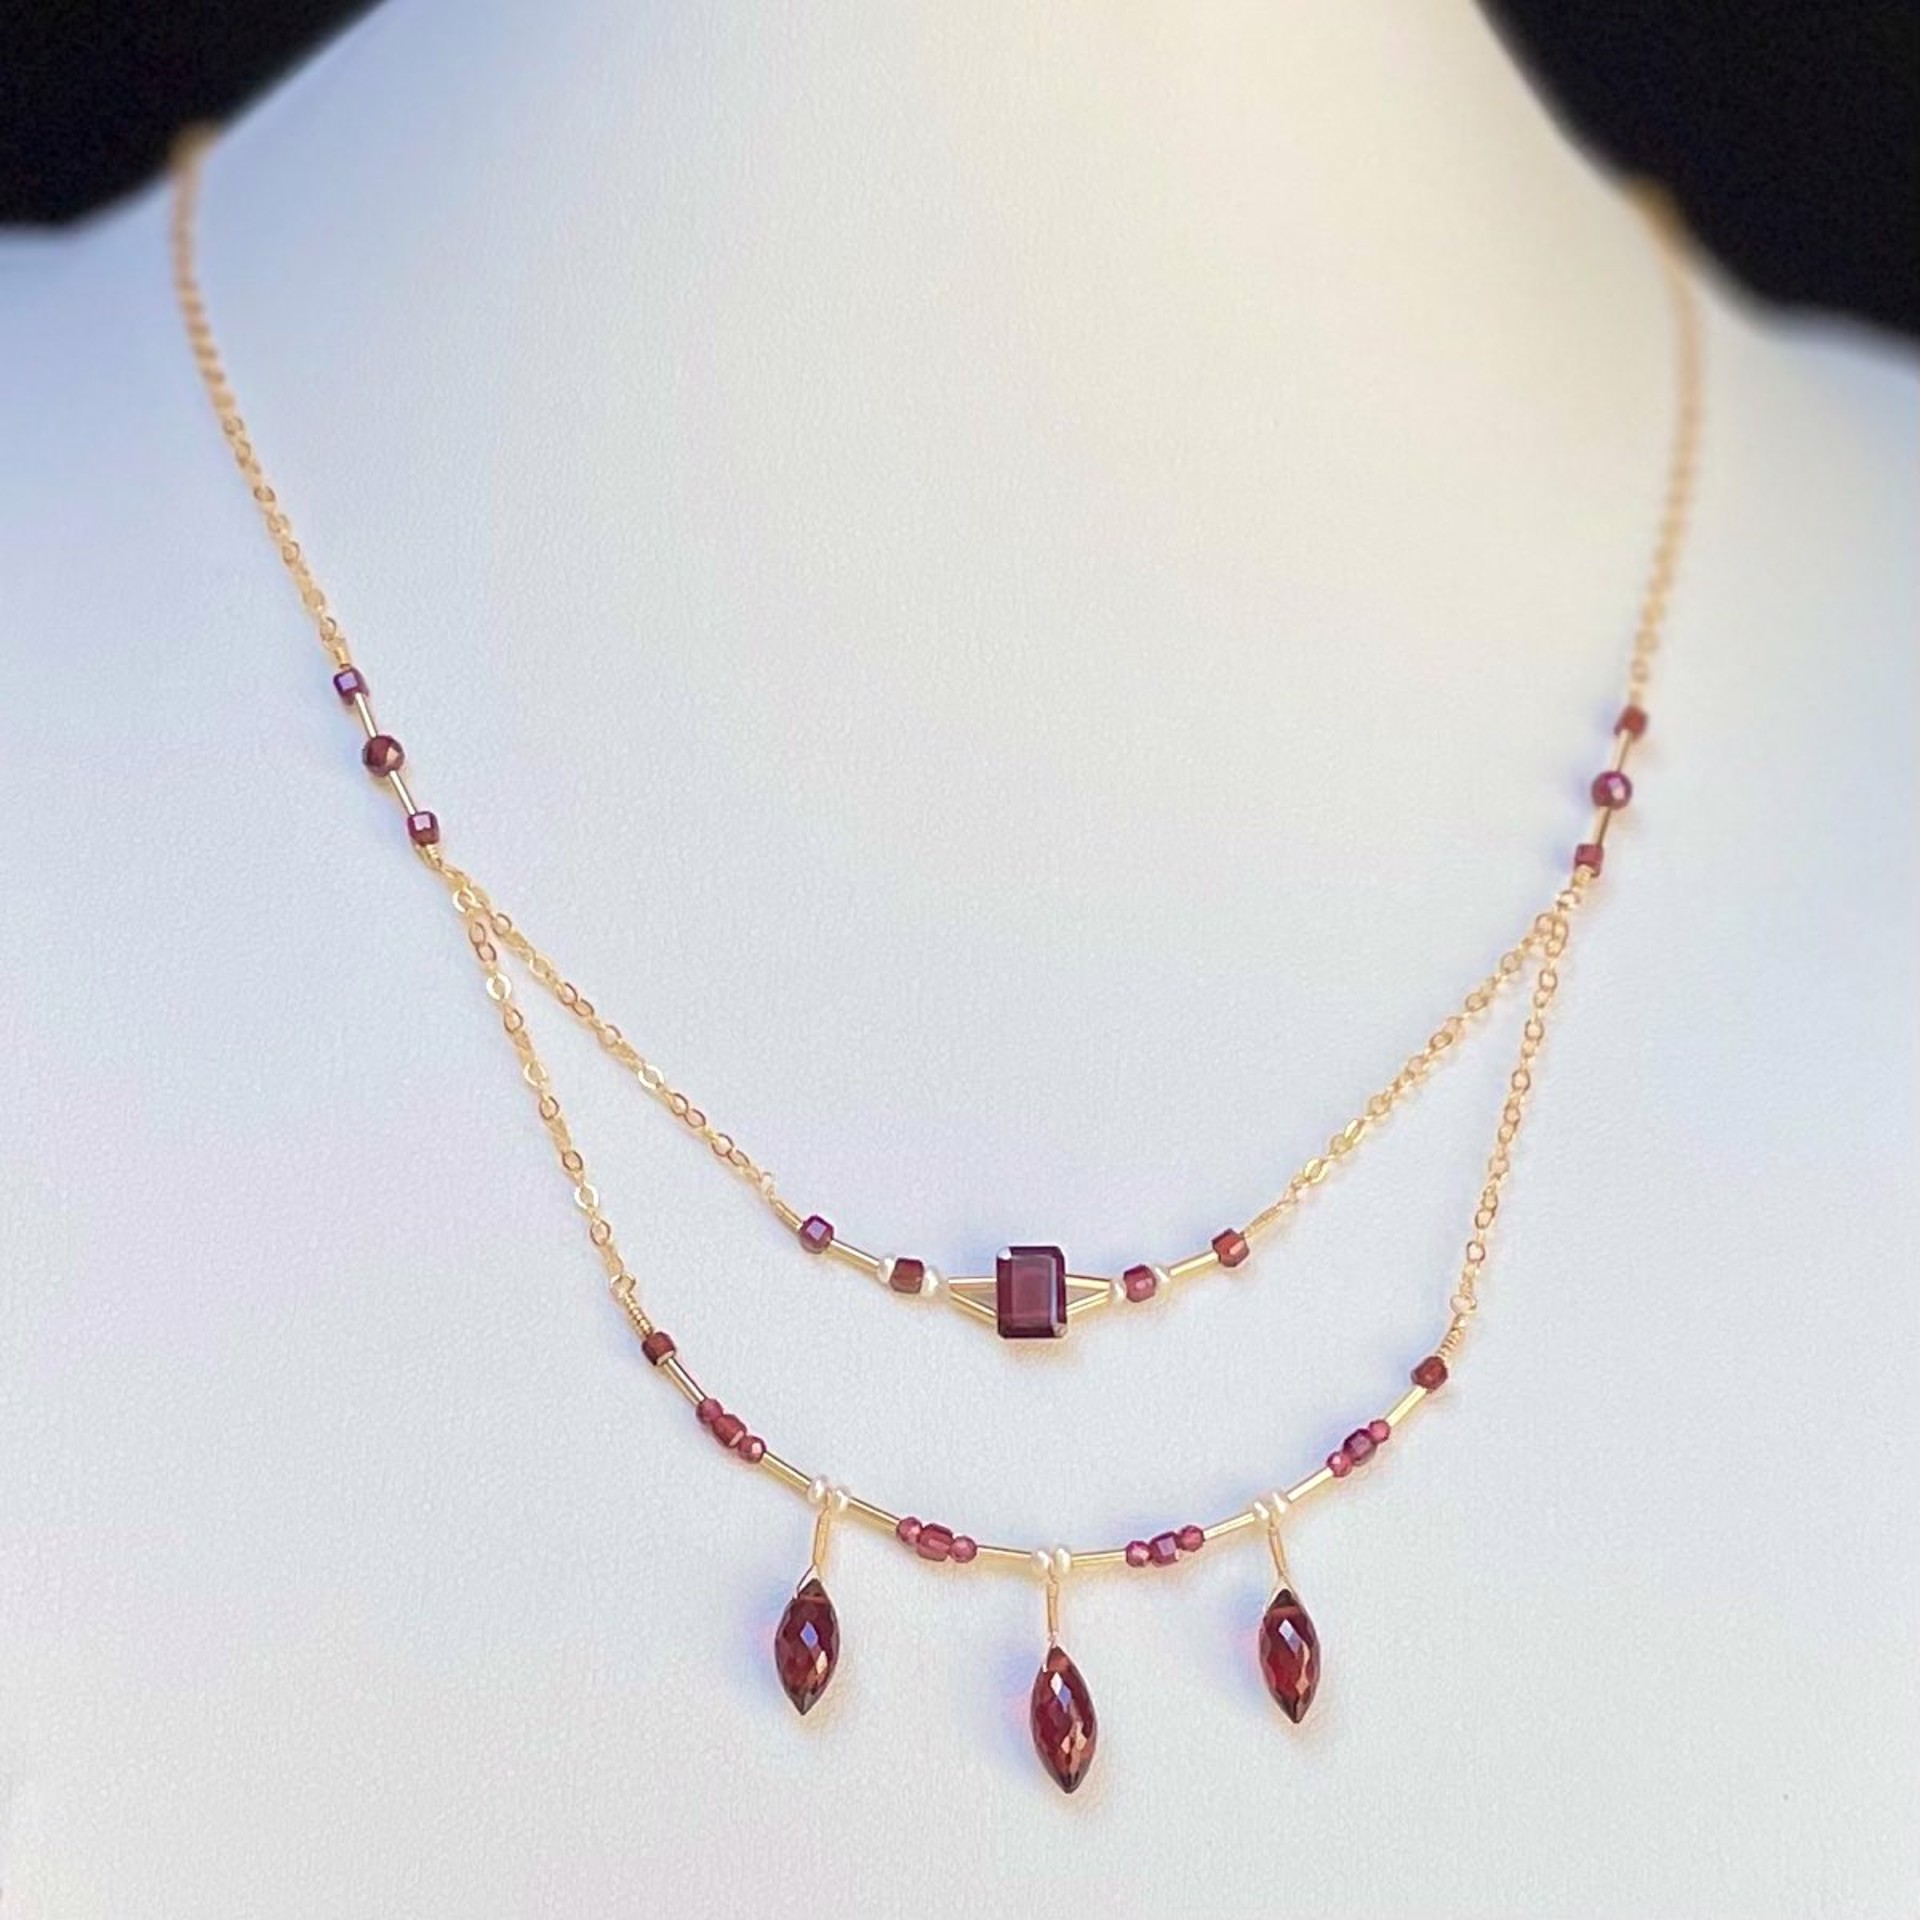 Red Garnet, Freshwater Pearl and 14K GF Double Necklace with Infinity Pendant by Lisa Kelley